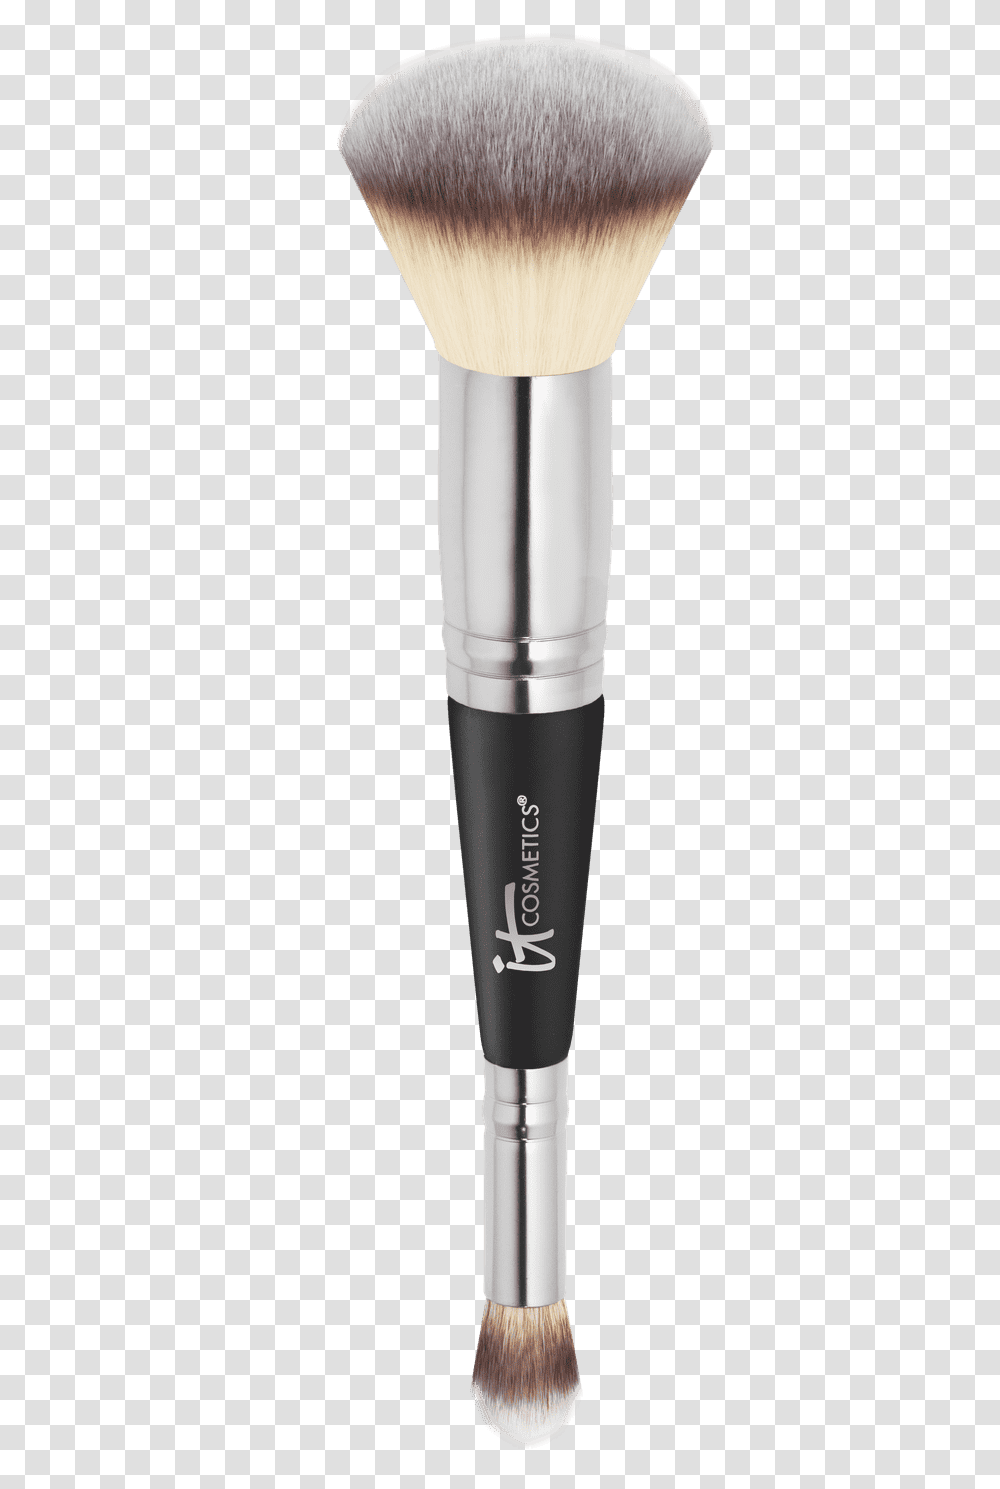 It Cosmetics Heavenly Luxe Complexion Perfection Brush Makeup Brushes, Tool, Toothbrush Transparent Png